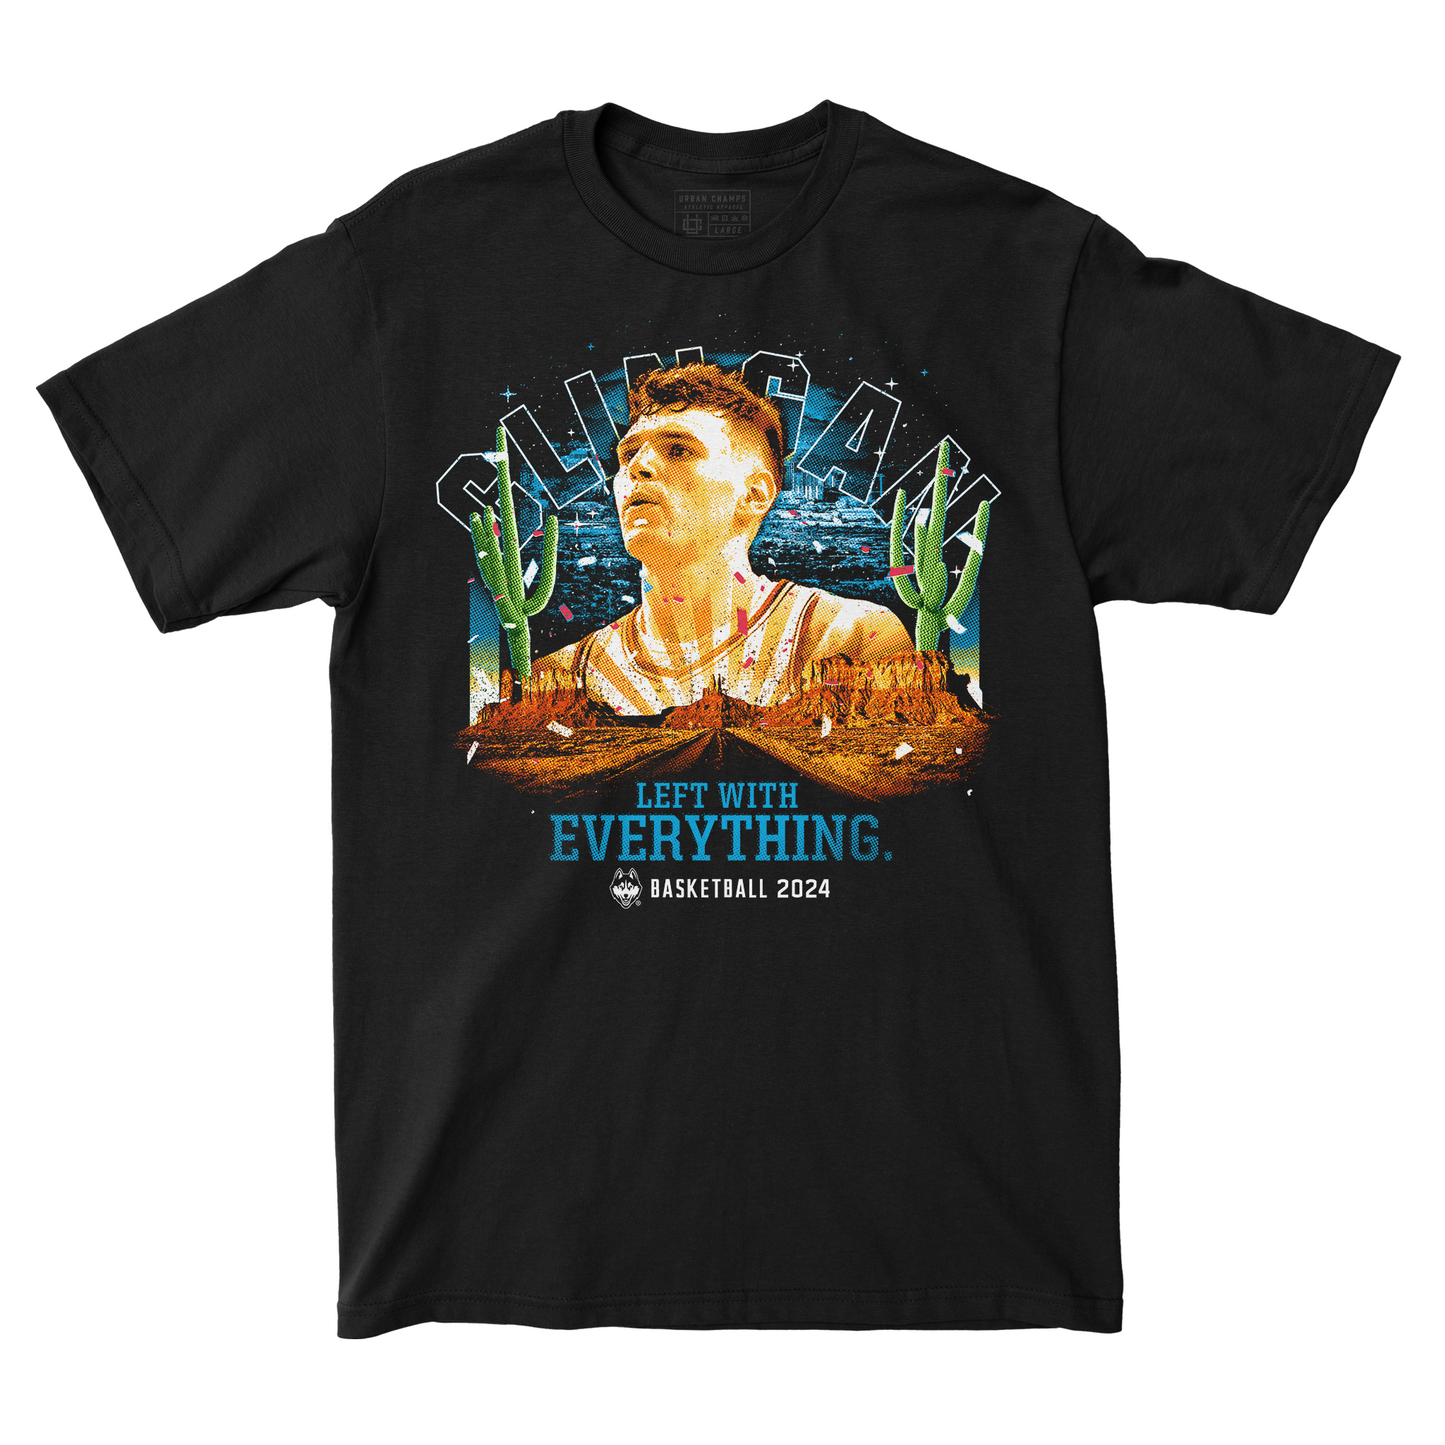 EXCLUSIVE RELEASE: Left With Everything Tee